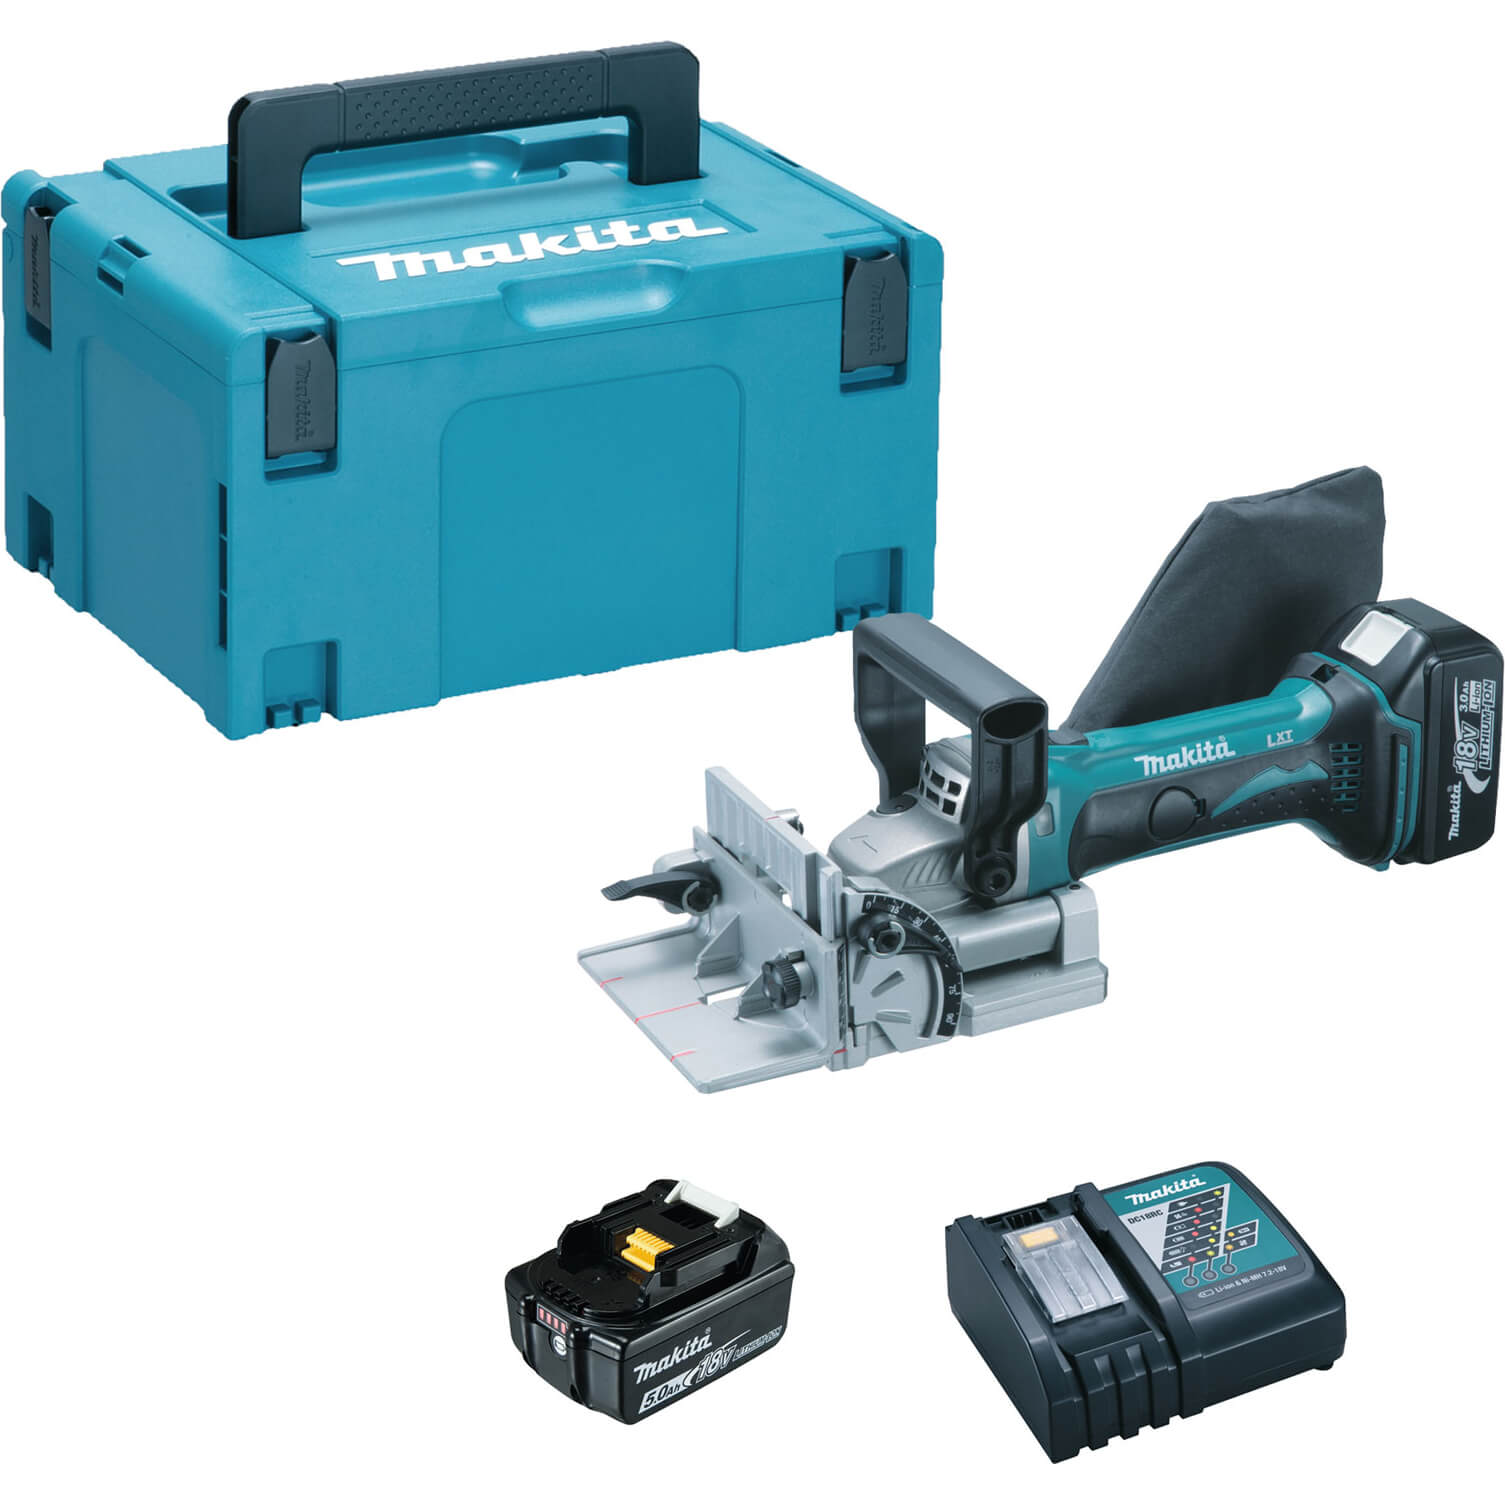 Makita DPJ180 18v Cordless LXT Biscuit Jointer 2 x 5ah Li-ion Charger Case